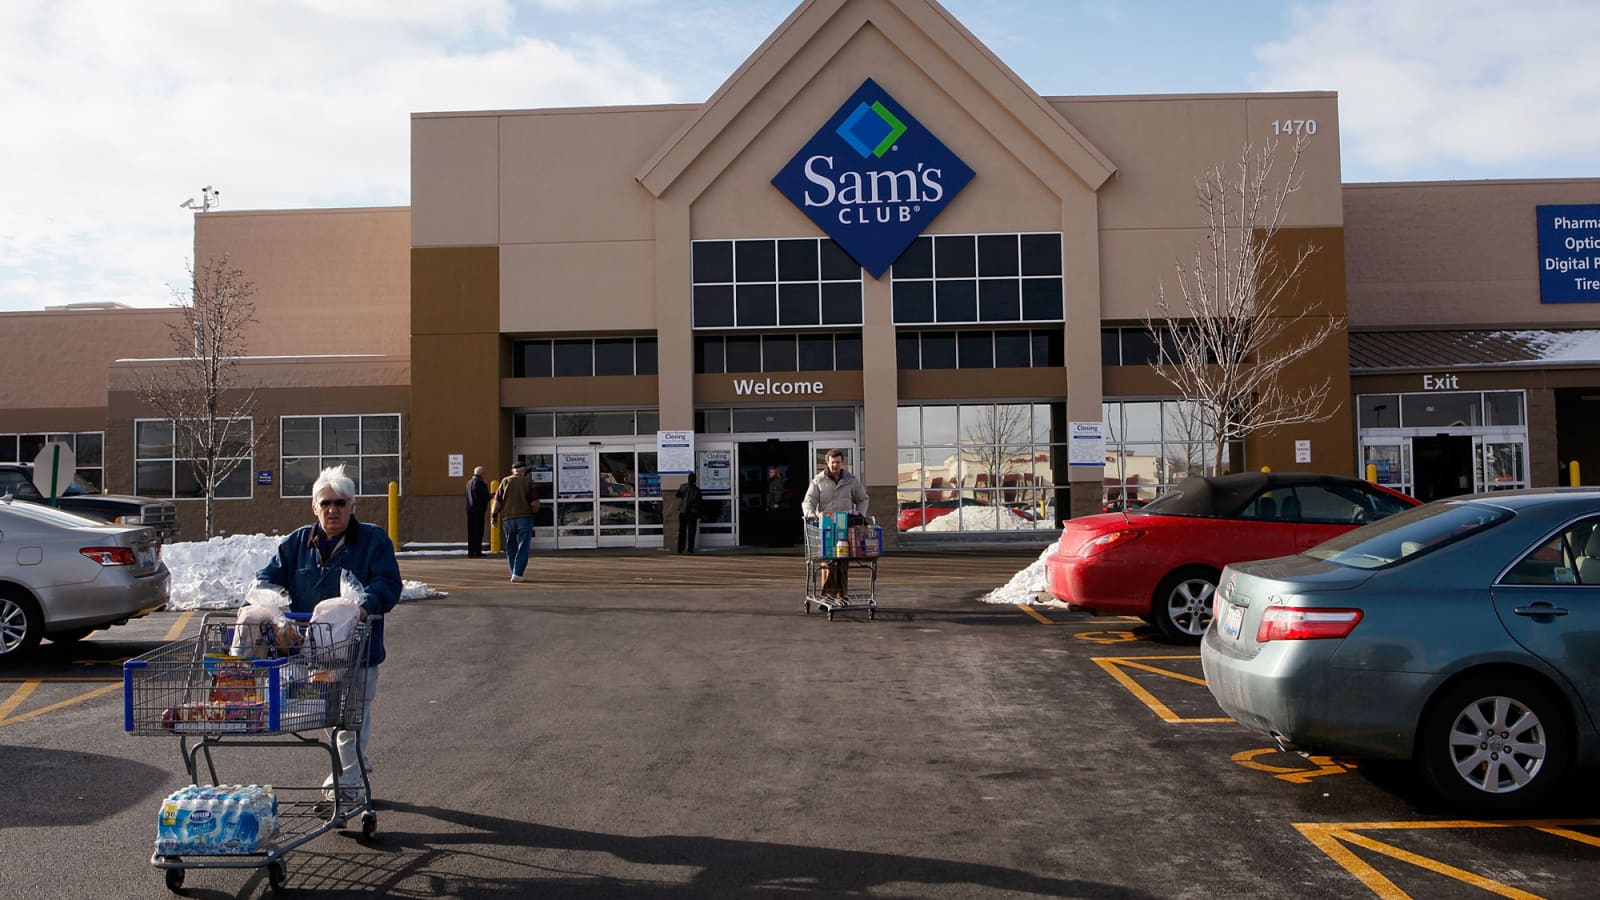 Sam's Club consolidates membership structure, offers free shipping